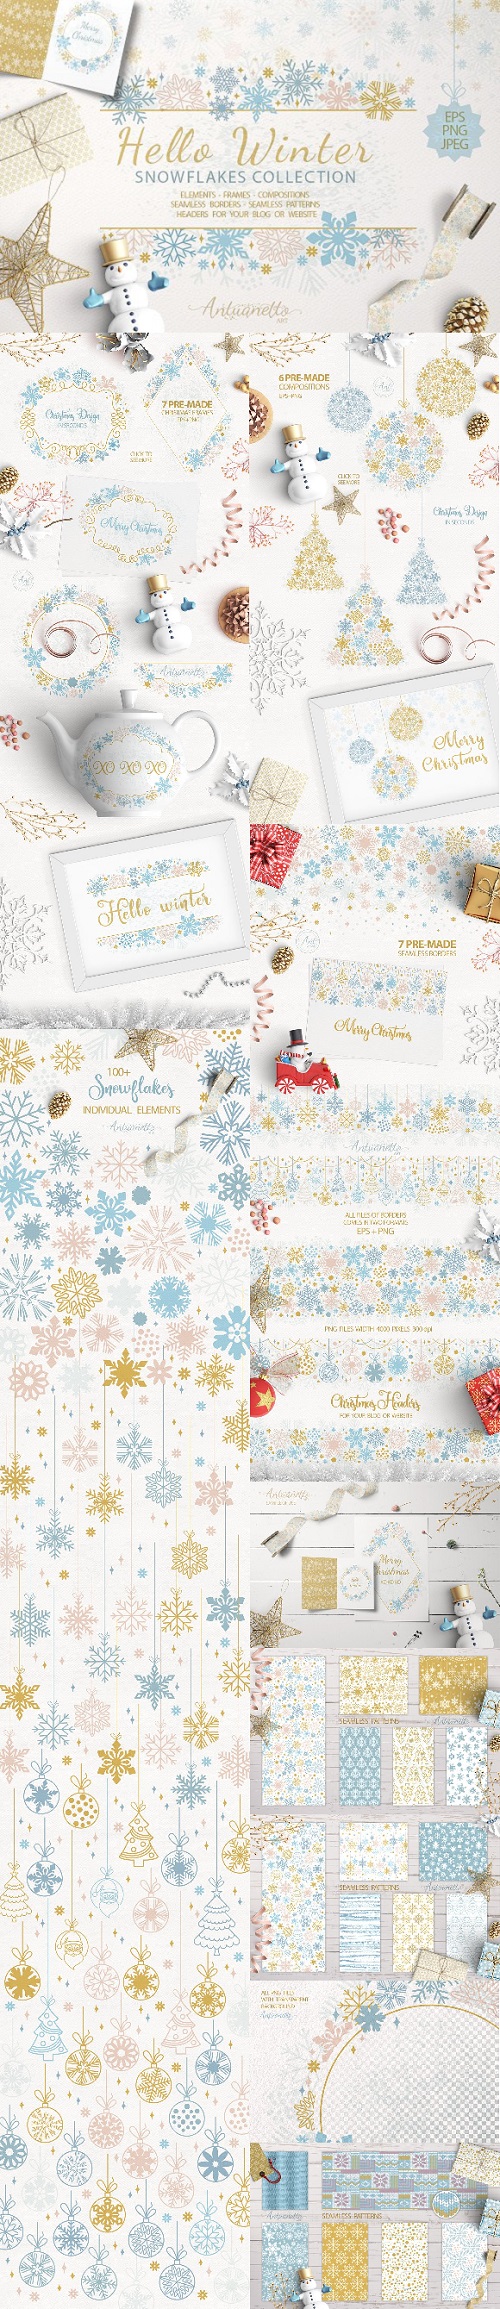 Sparkling snowflakes collection - 2104105